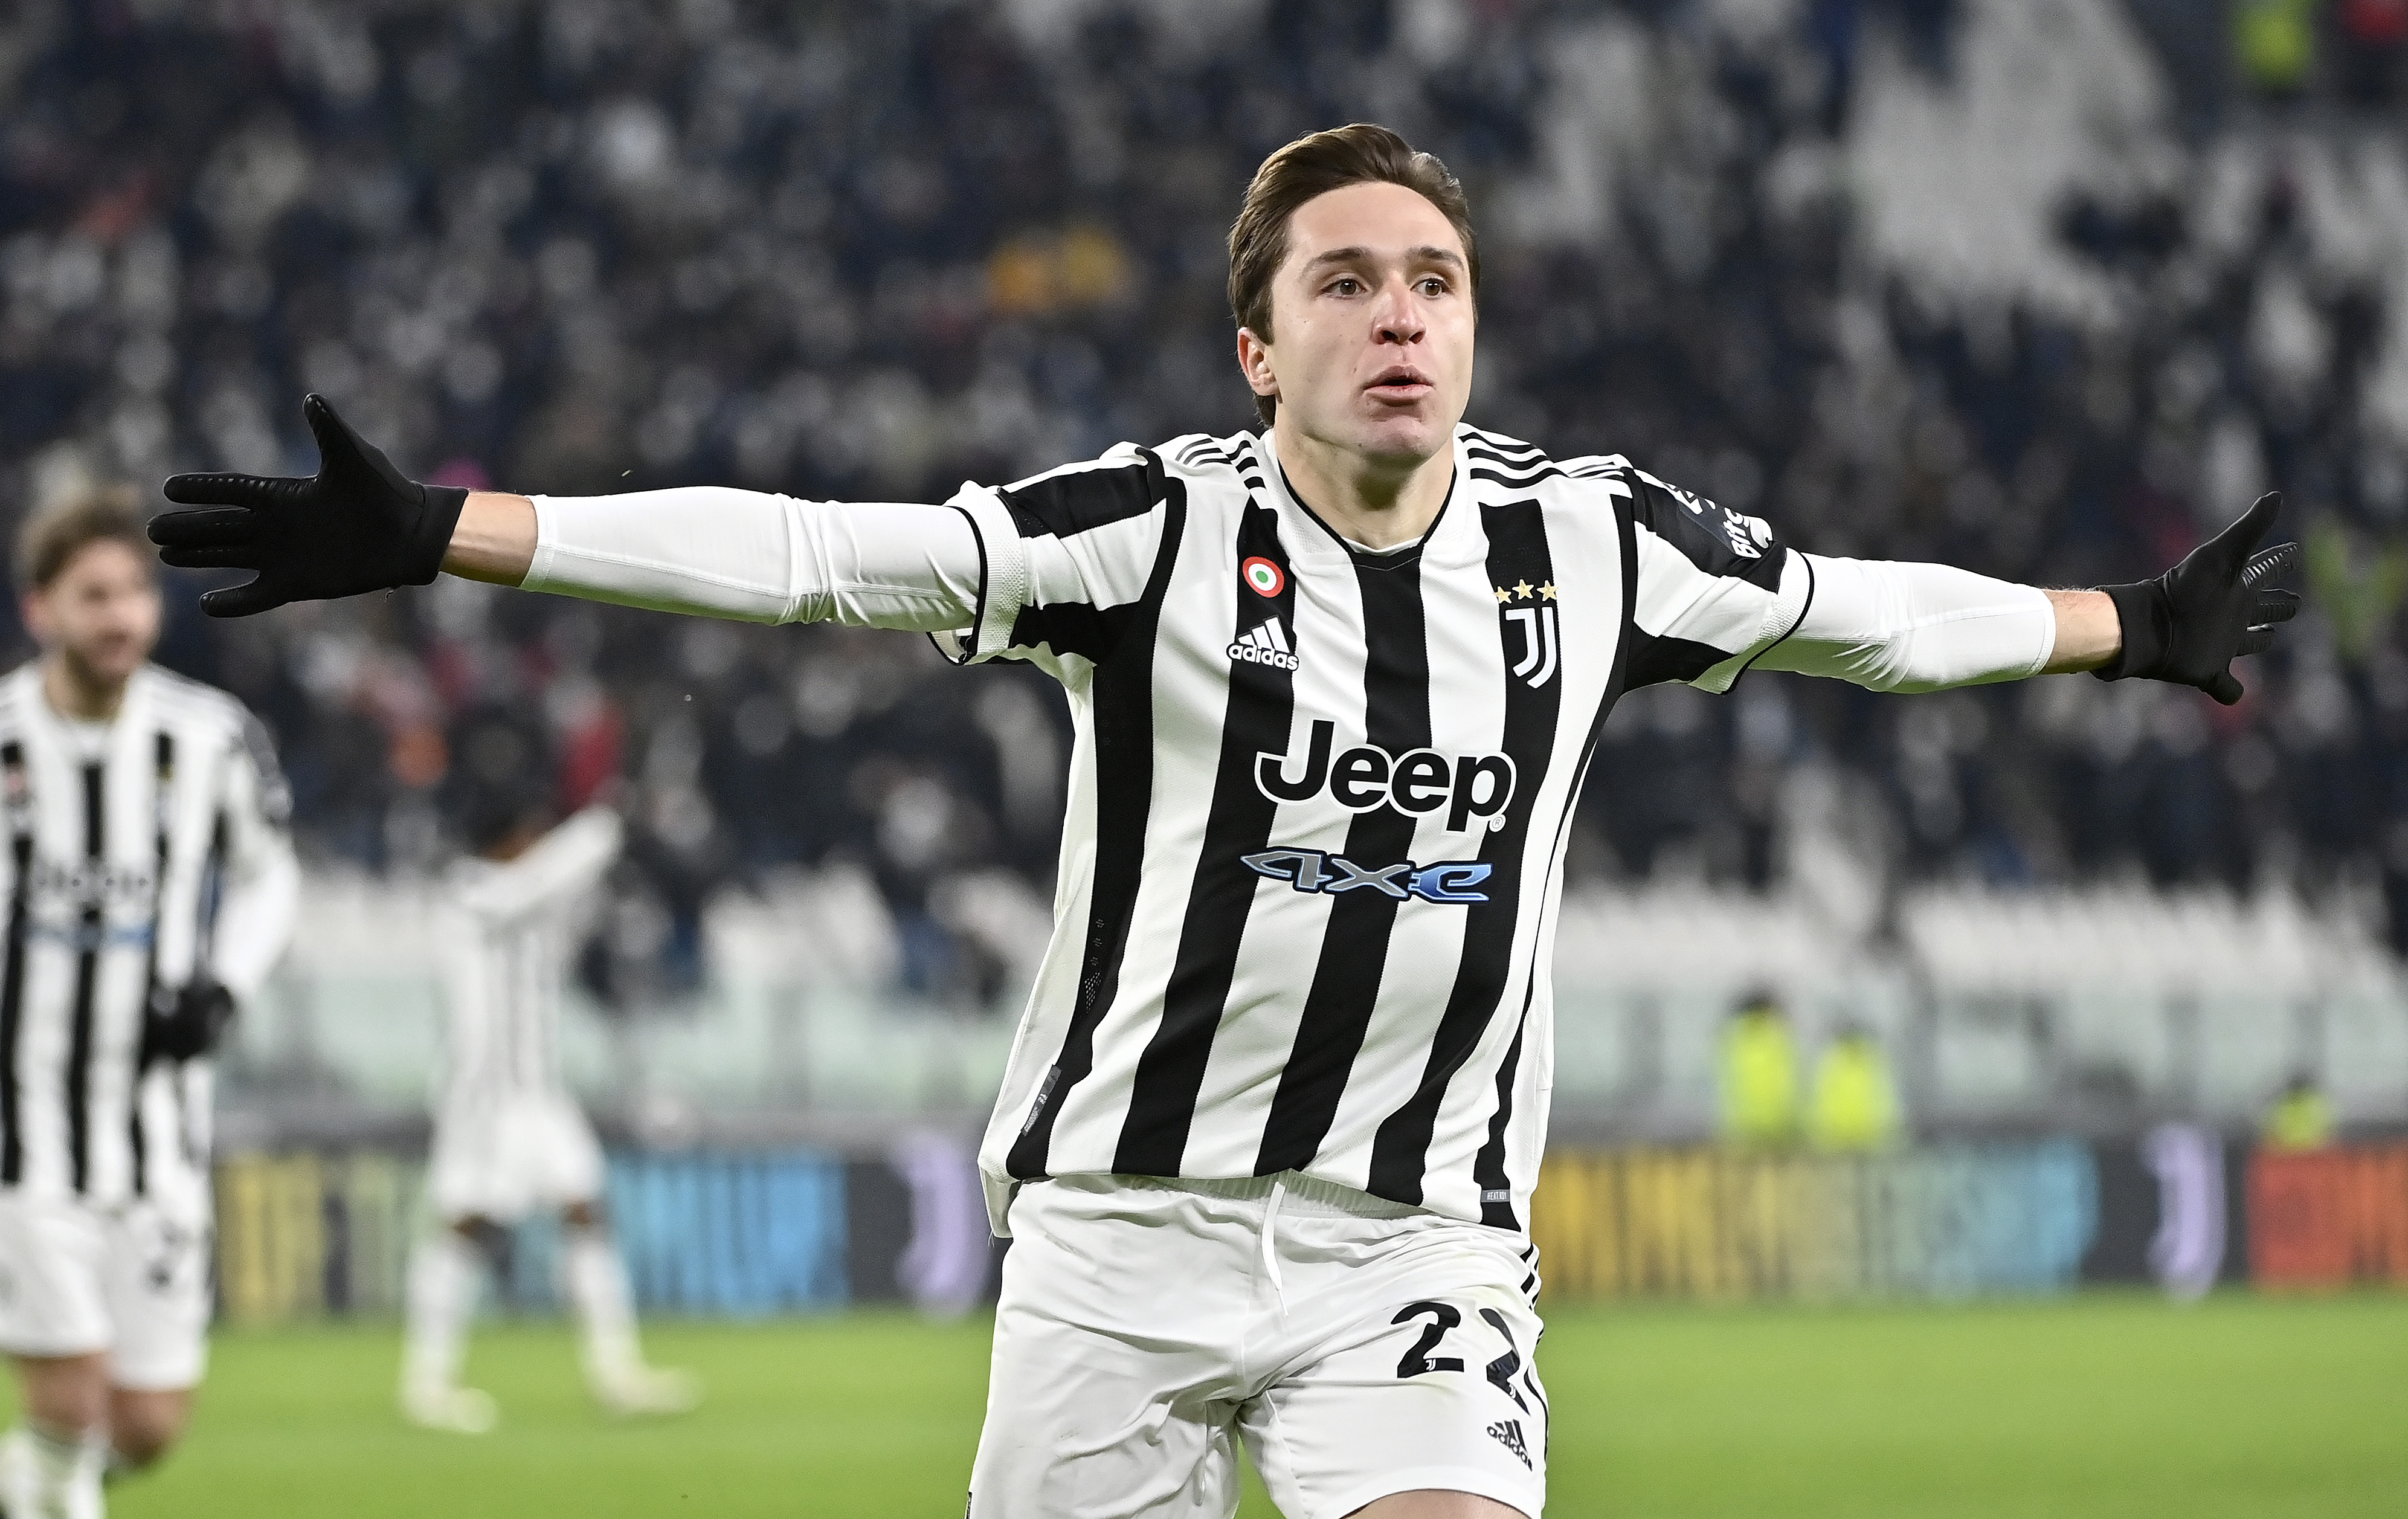 Juventus' Federico Chiesa is a Liverpool transfer target.